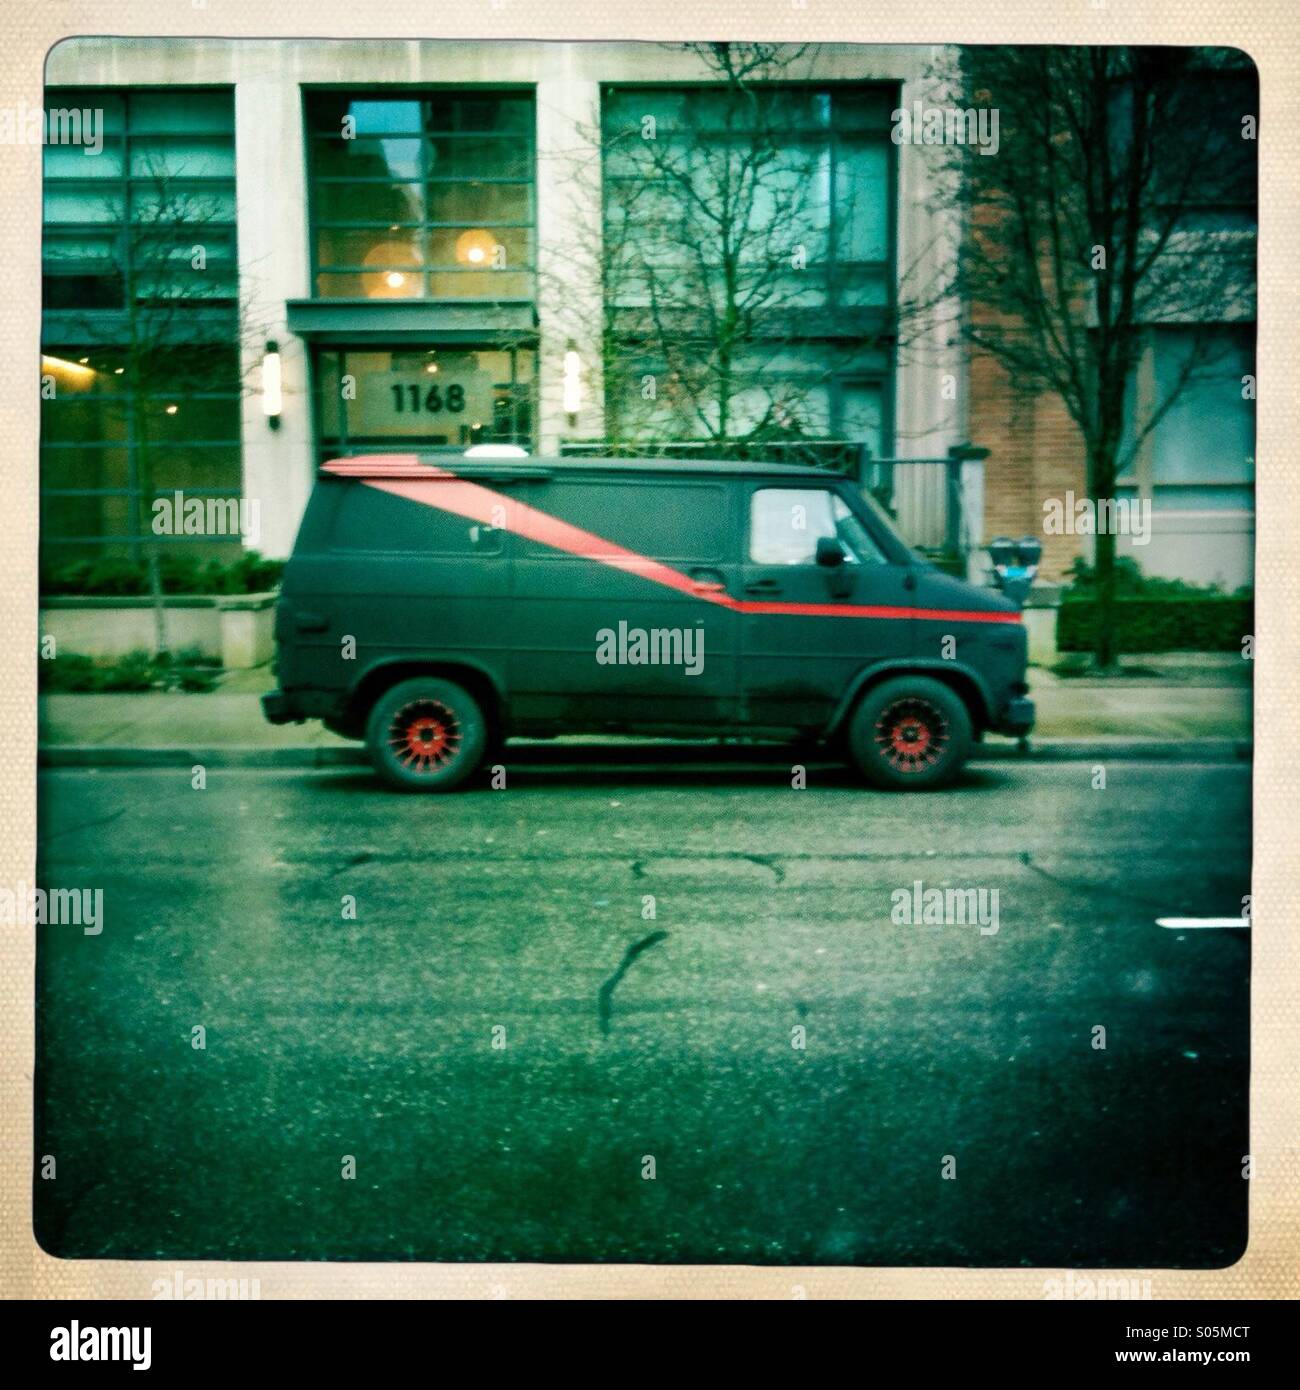 What looks to be the a-team van parked outside a building. Stock Photo